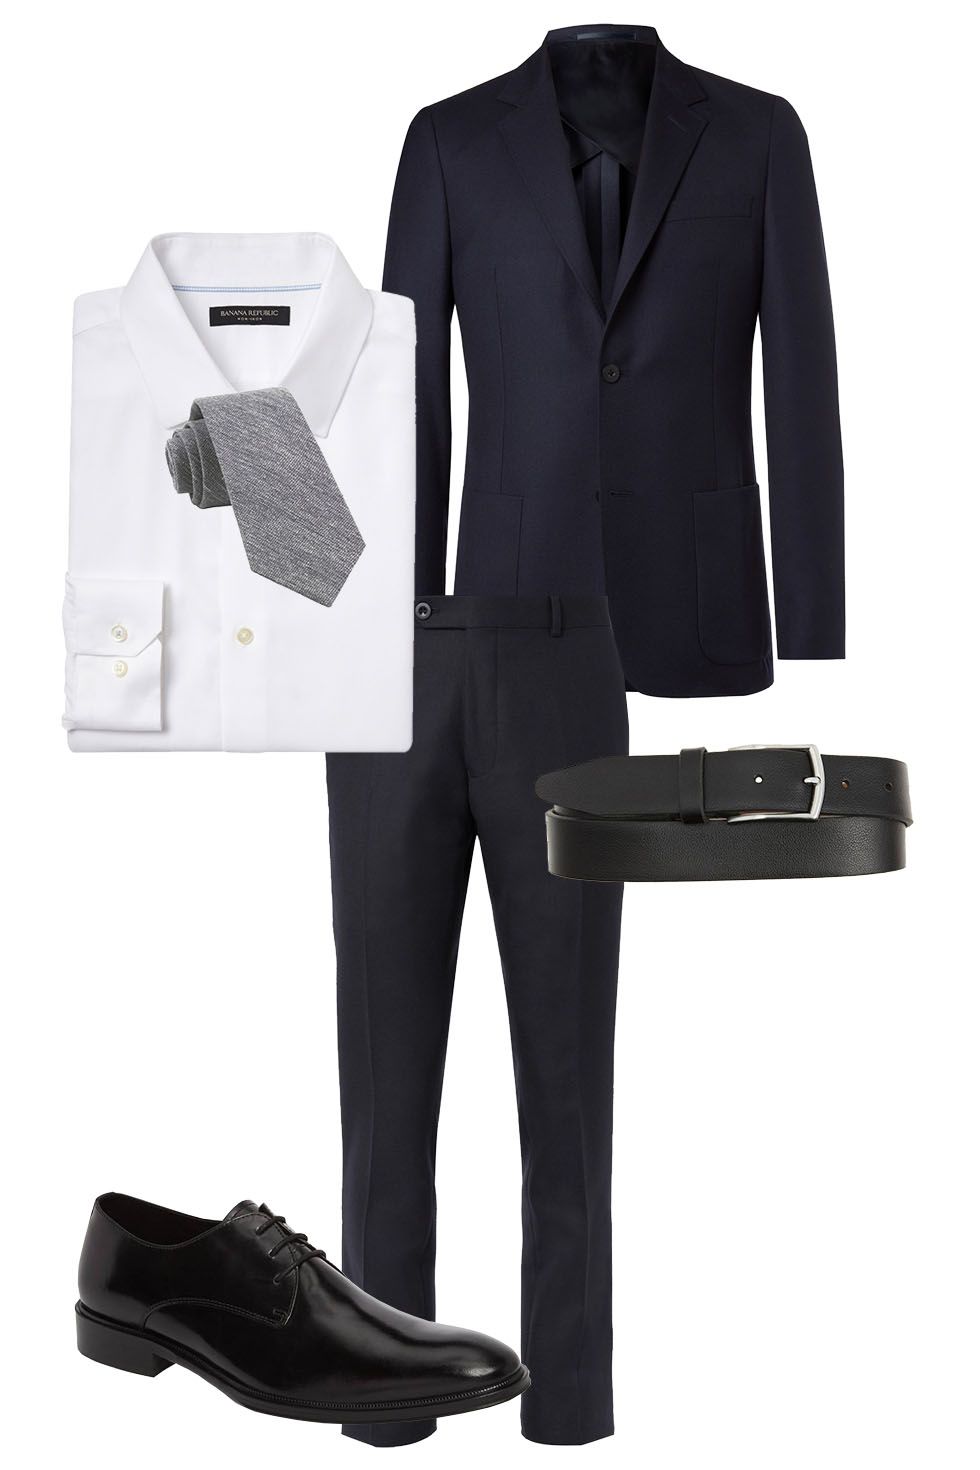 mens formal wear for interview